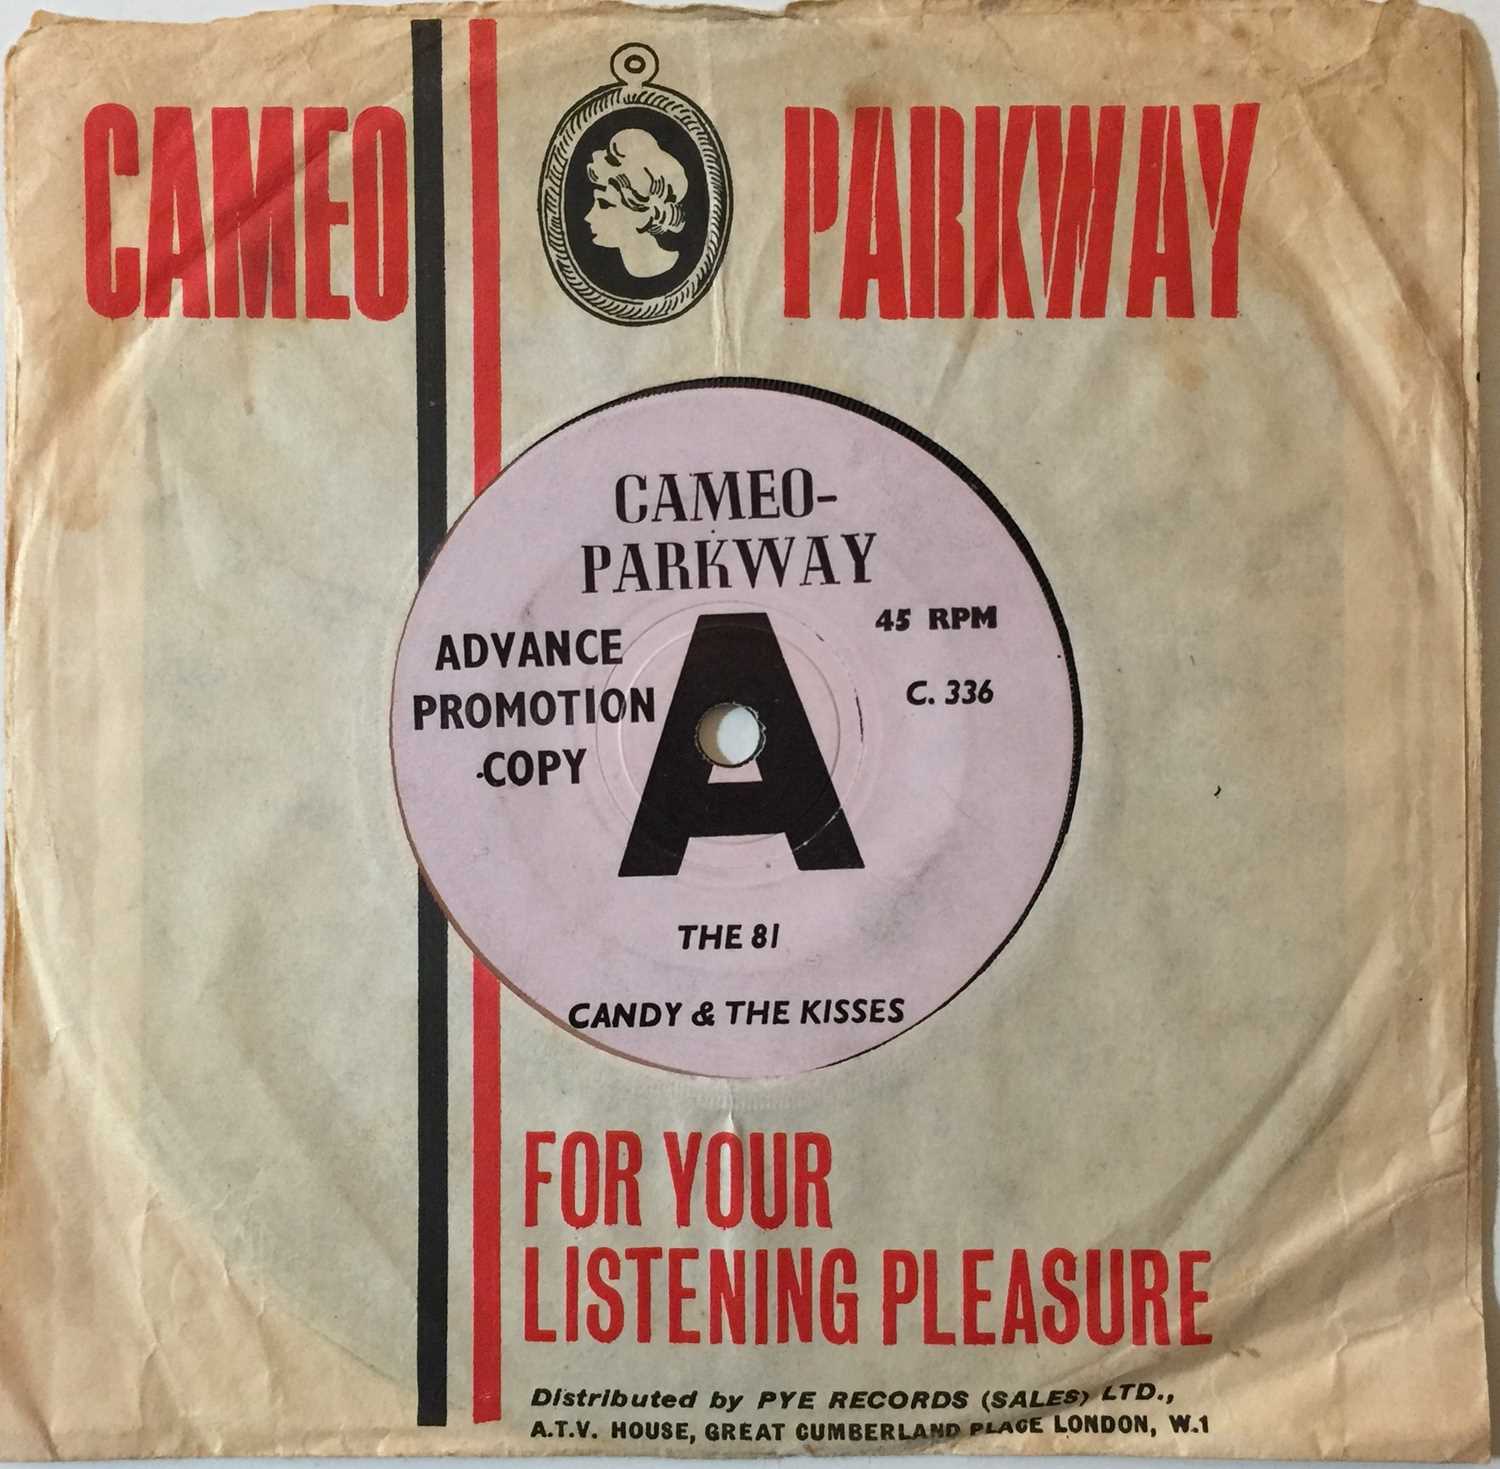 Lot 14 - CANDY & THE KISSES - THE 81 7" (ORIGINAL UK DEMO COPY - CAMEO-PARKWAY C. 336)